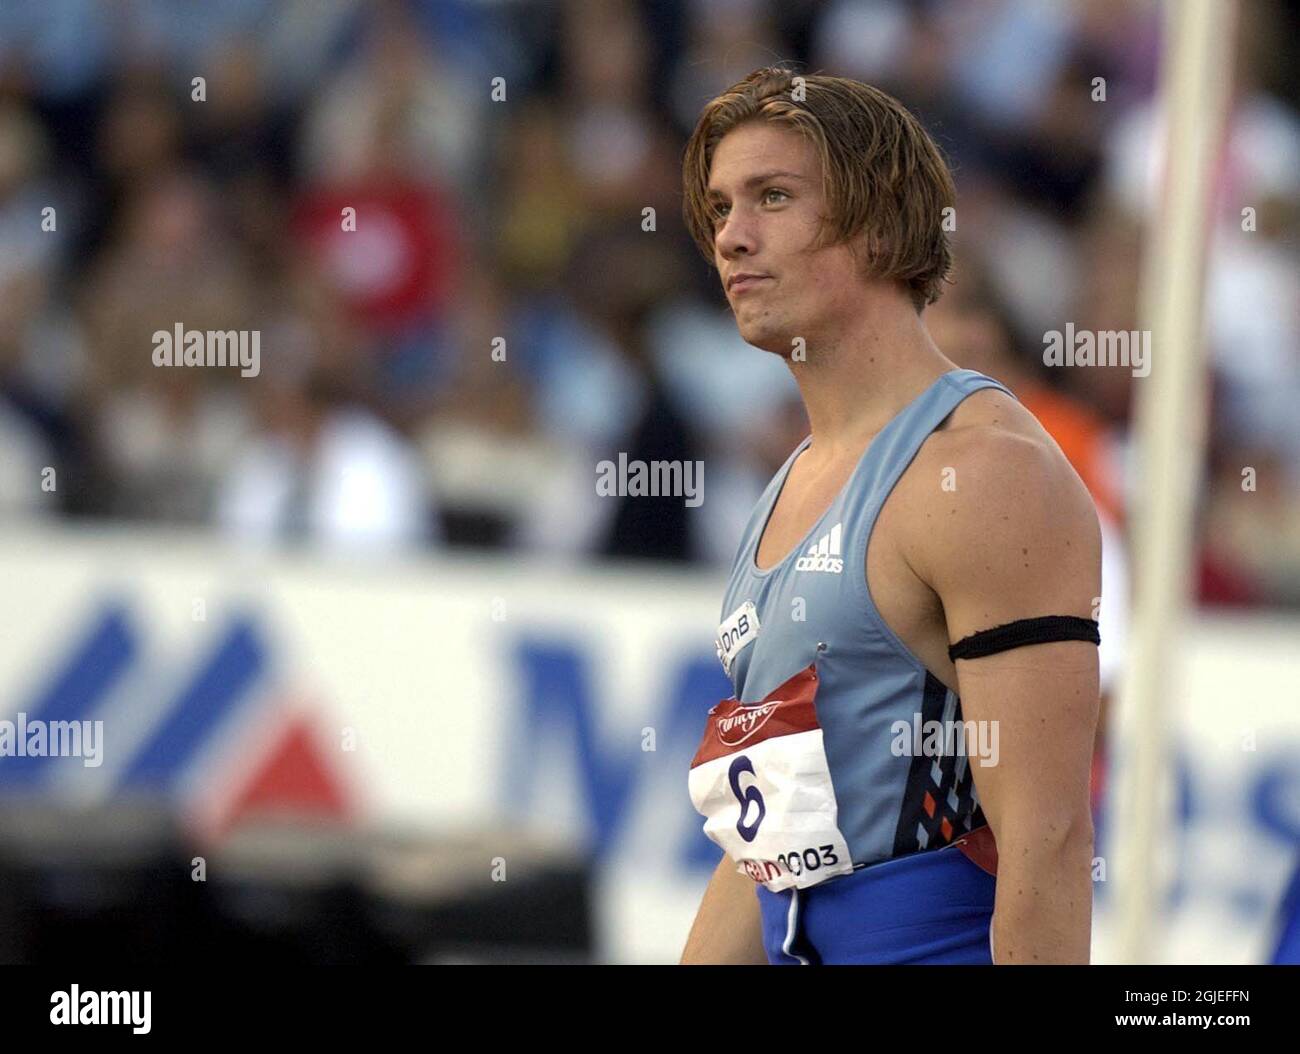 Norway's Andreas Thorkildsen looks unhappy with his performance during the javelin  Stock Photo